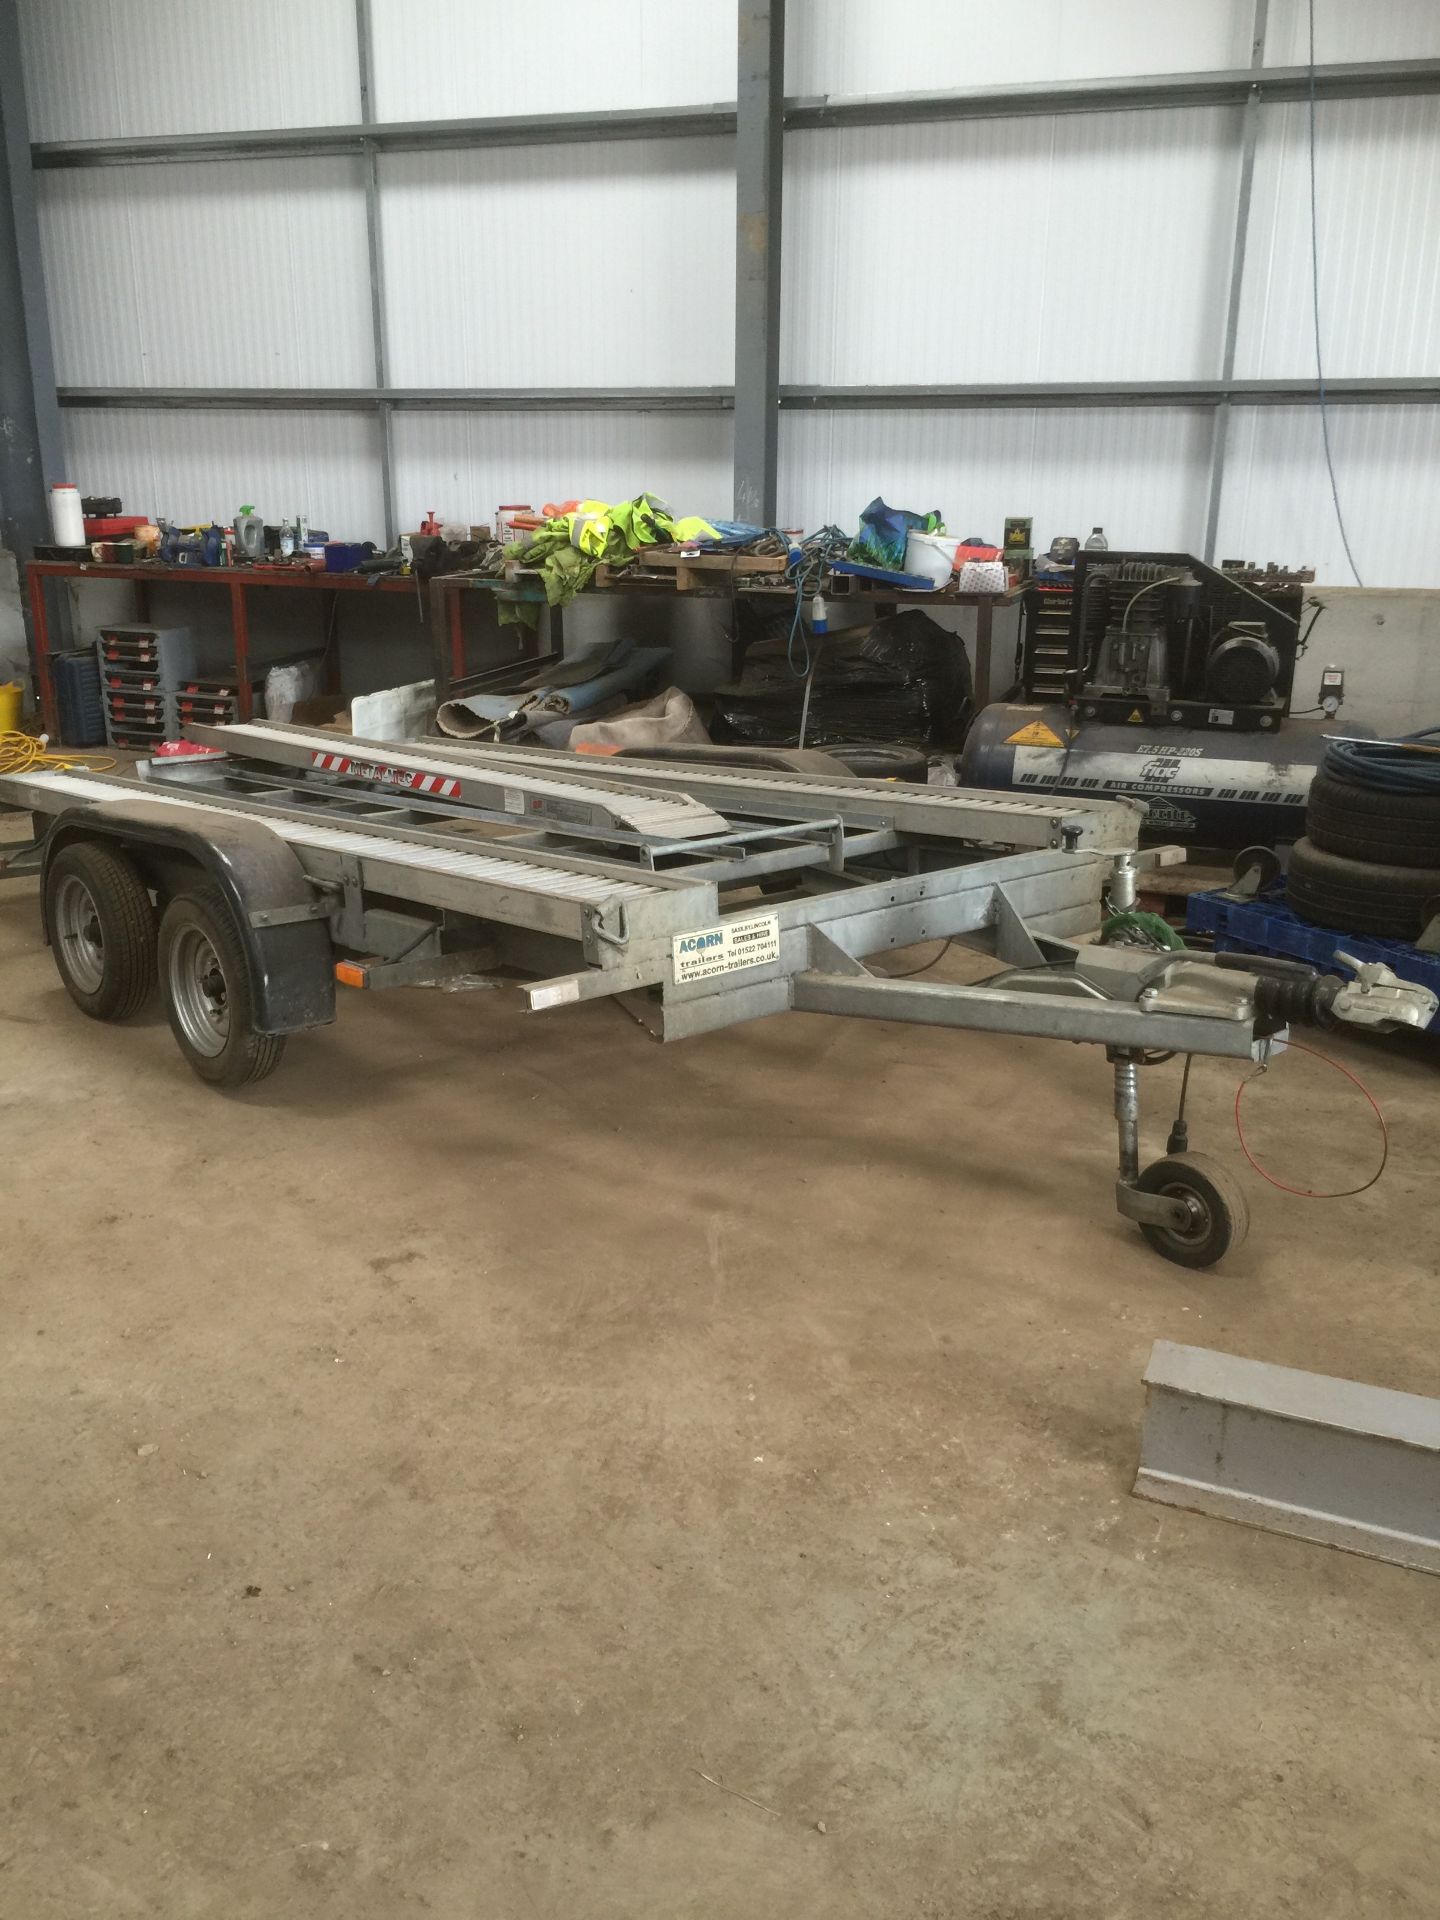 Twin Axel Car Trailer - Length - trailer bed 3.5m overall 4.8m - width - 2.01m - overall unladen